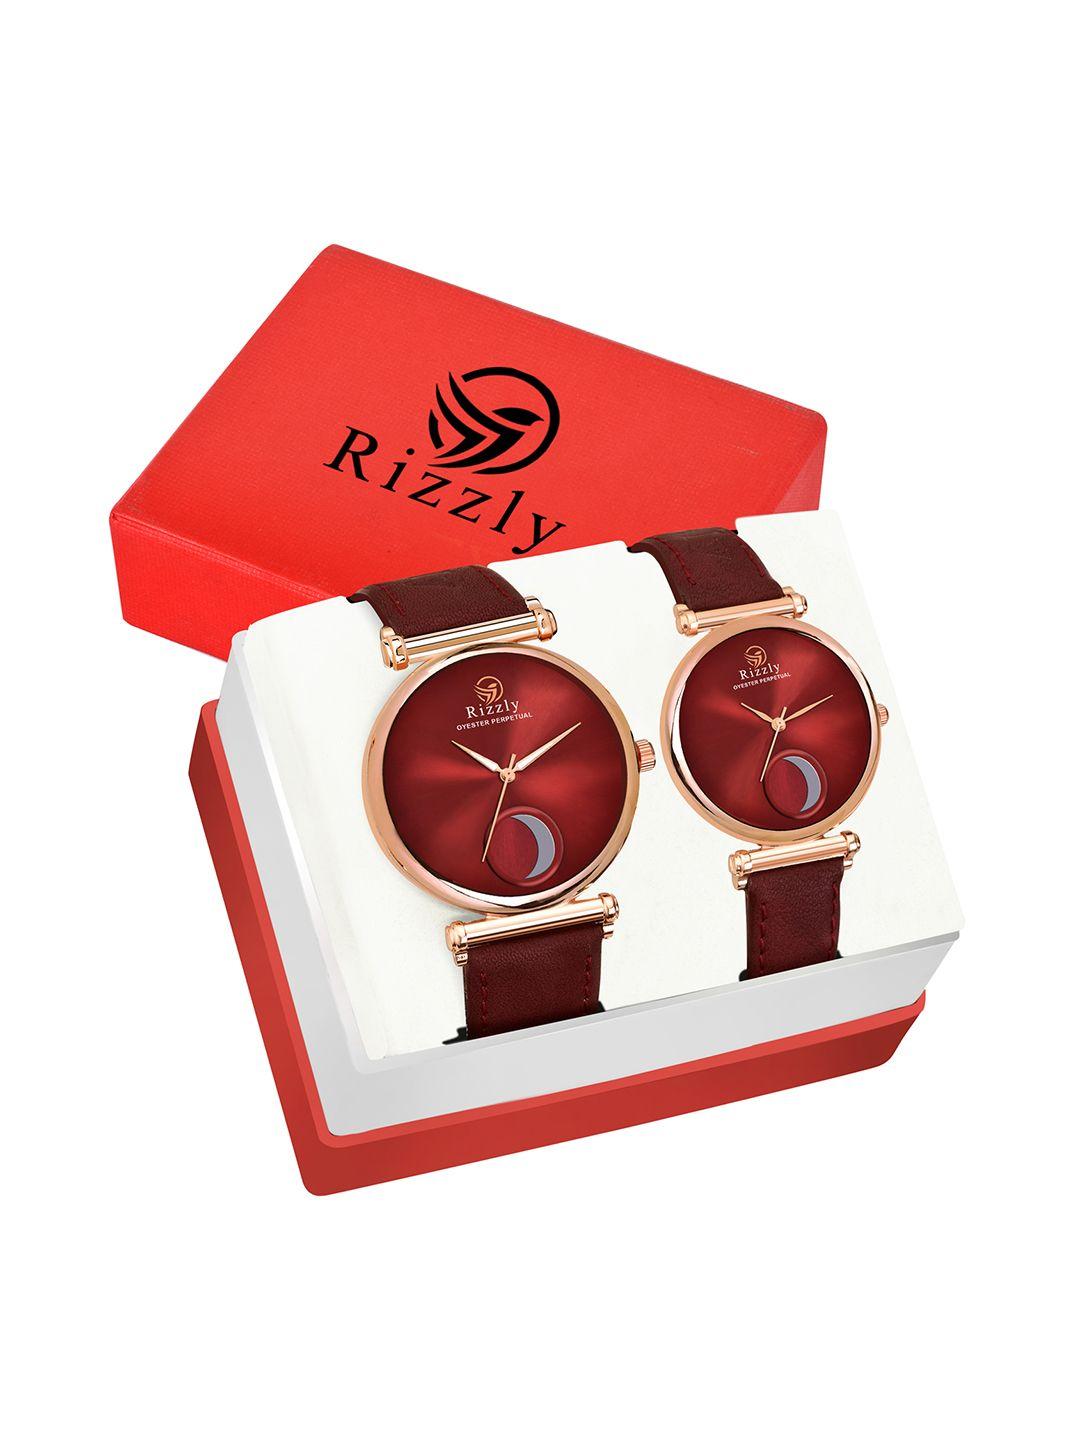 rizzly unisex maroon brass dial couple analogue watch gift set   rz-301-303